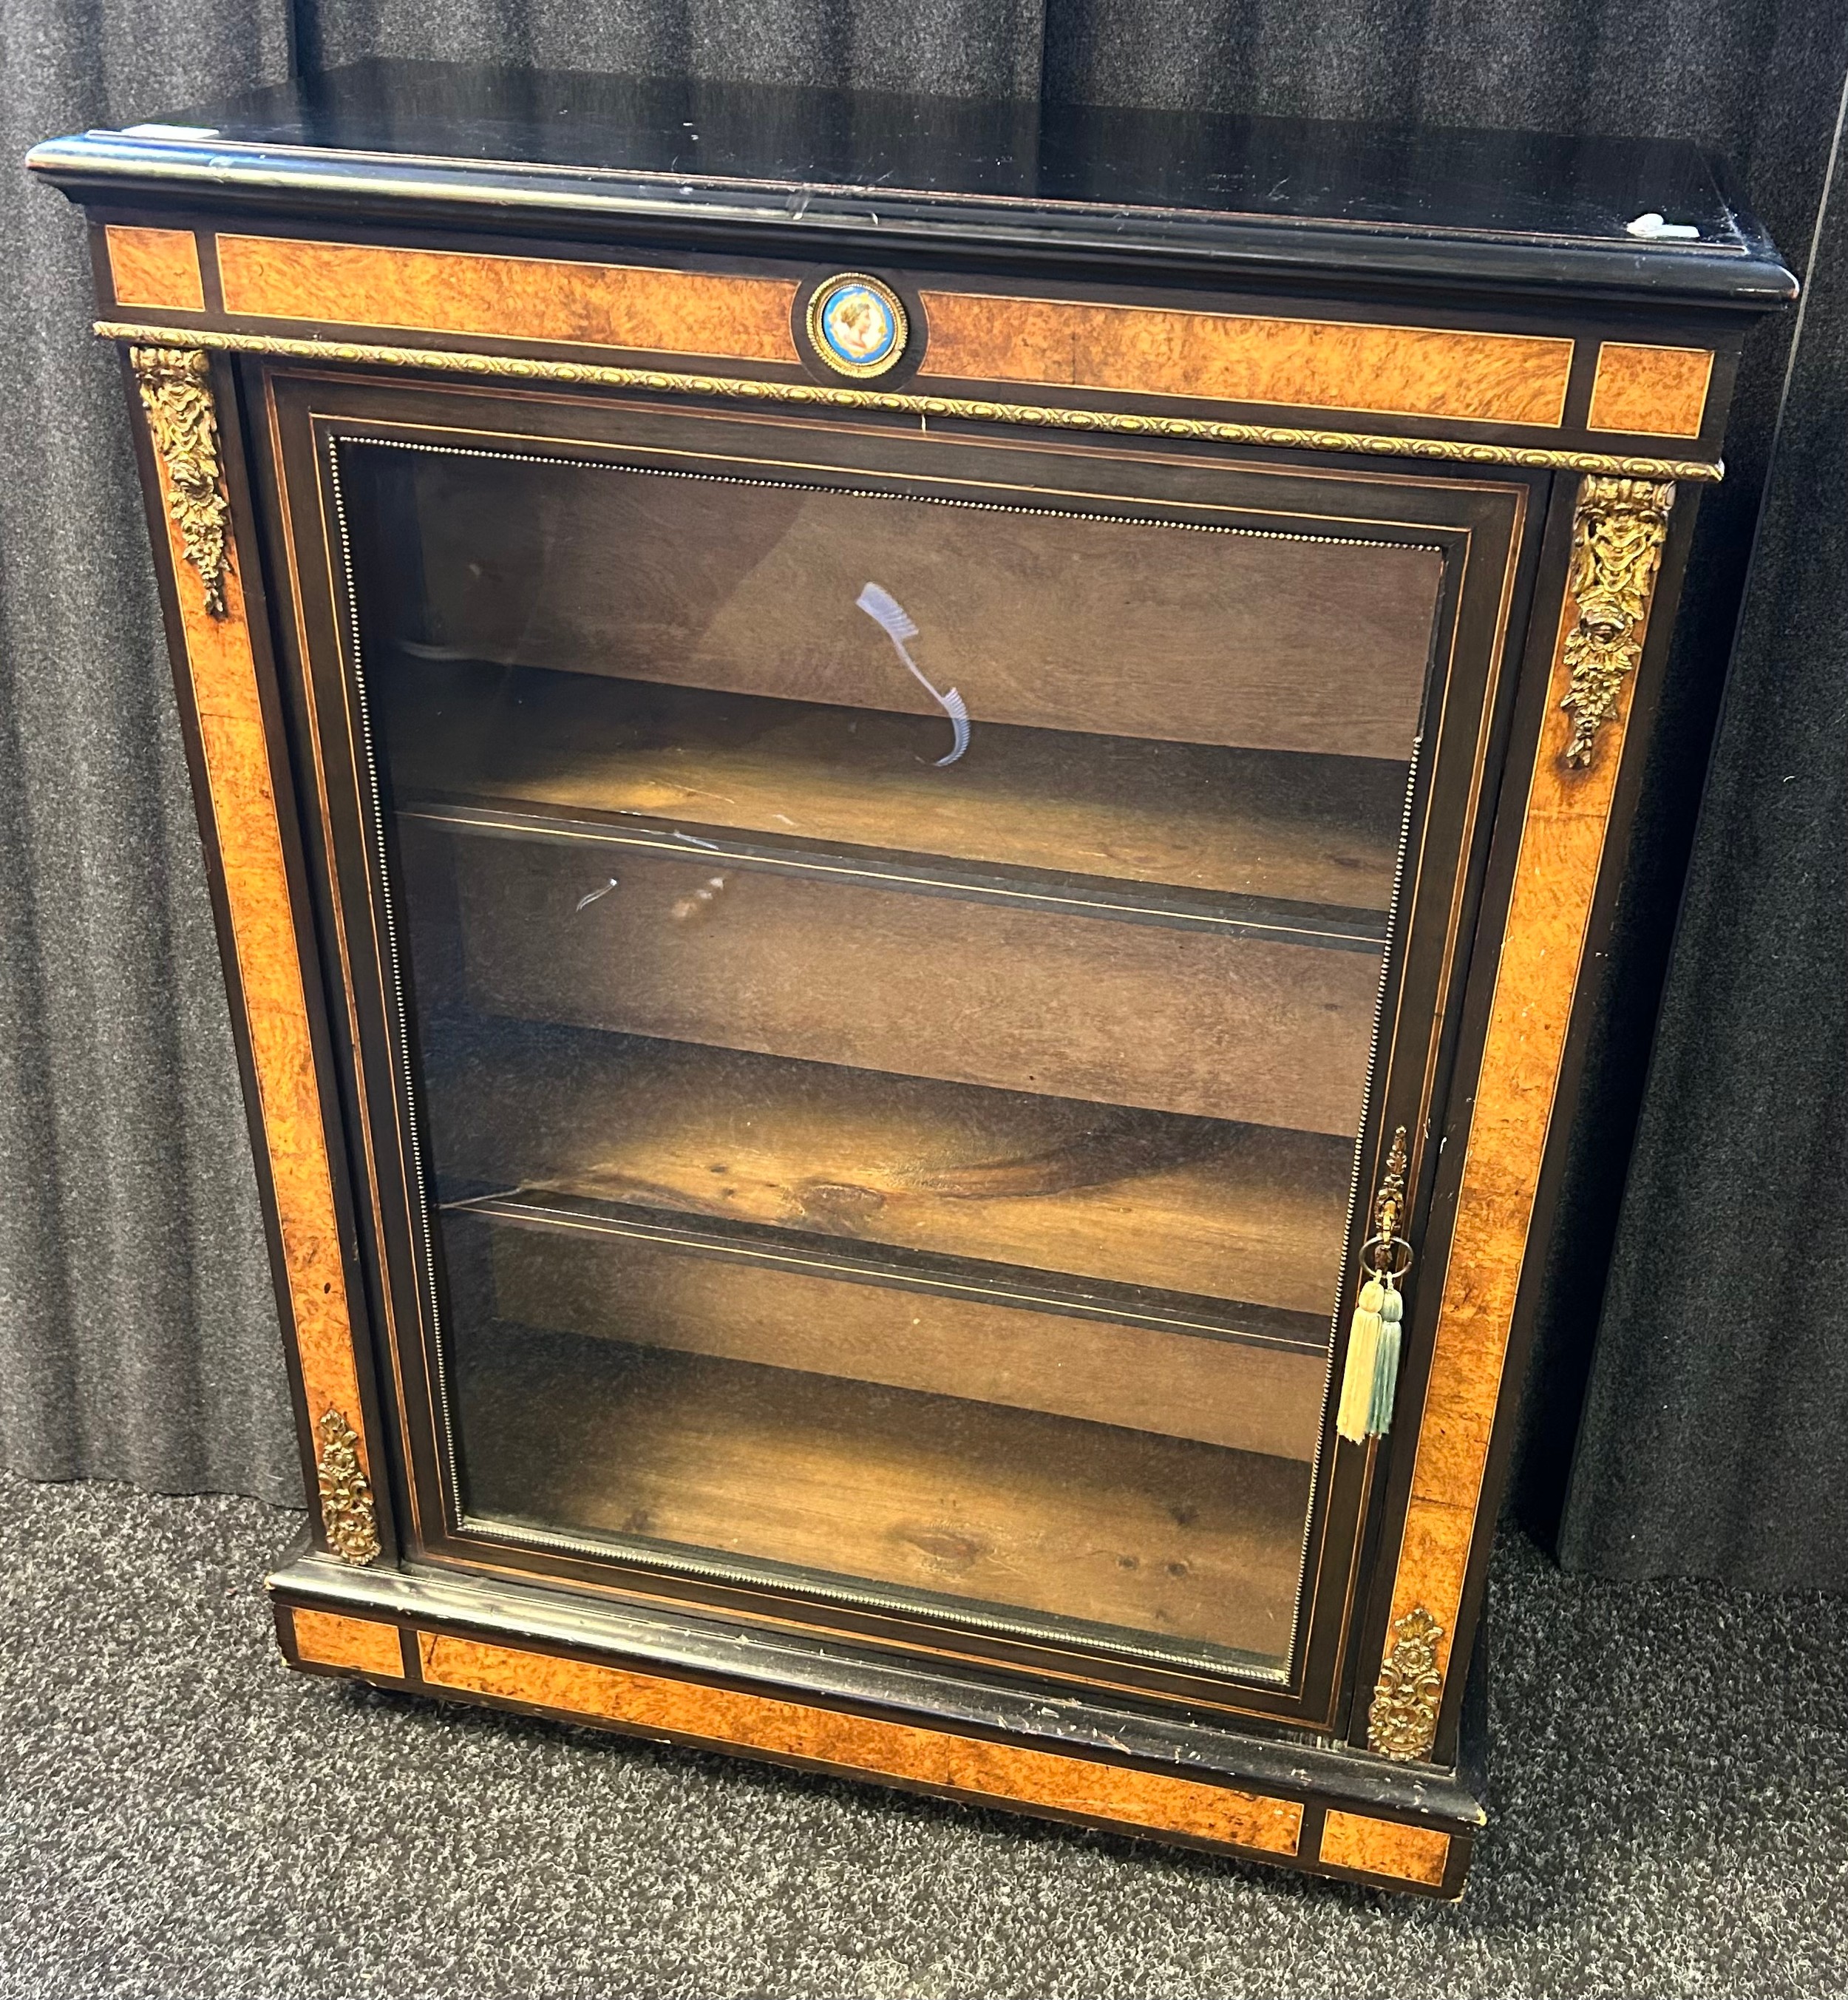 Reproduction blackened display unit with walnut veneer, the glazed door opening to shelved interior, - Image 2 of 2